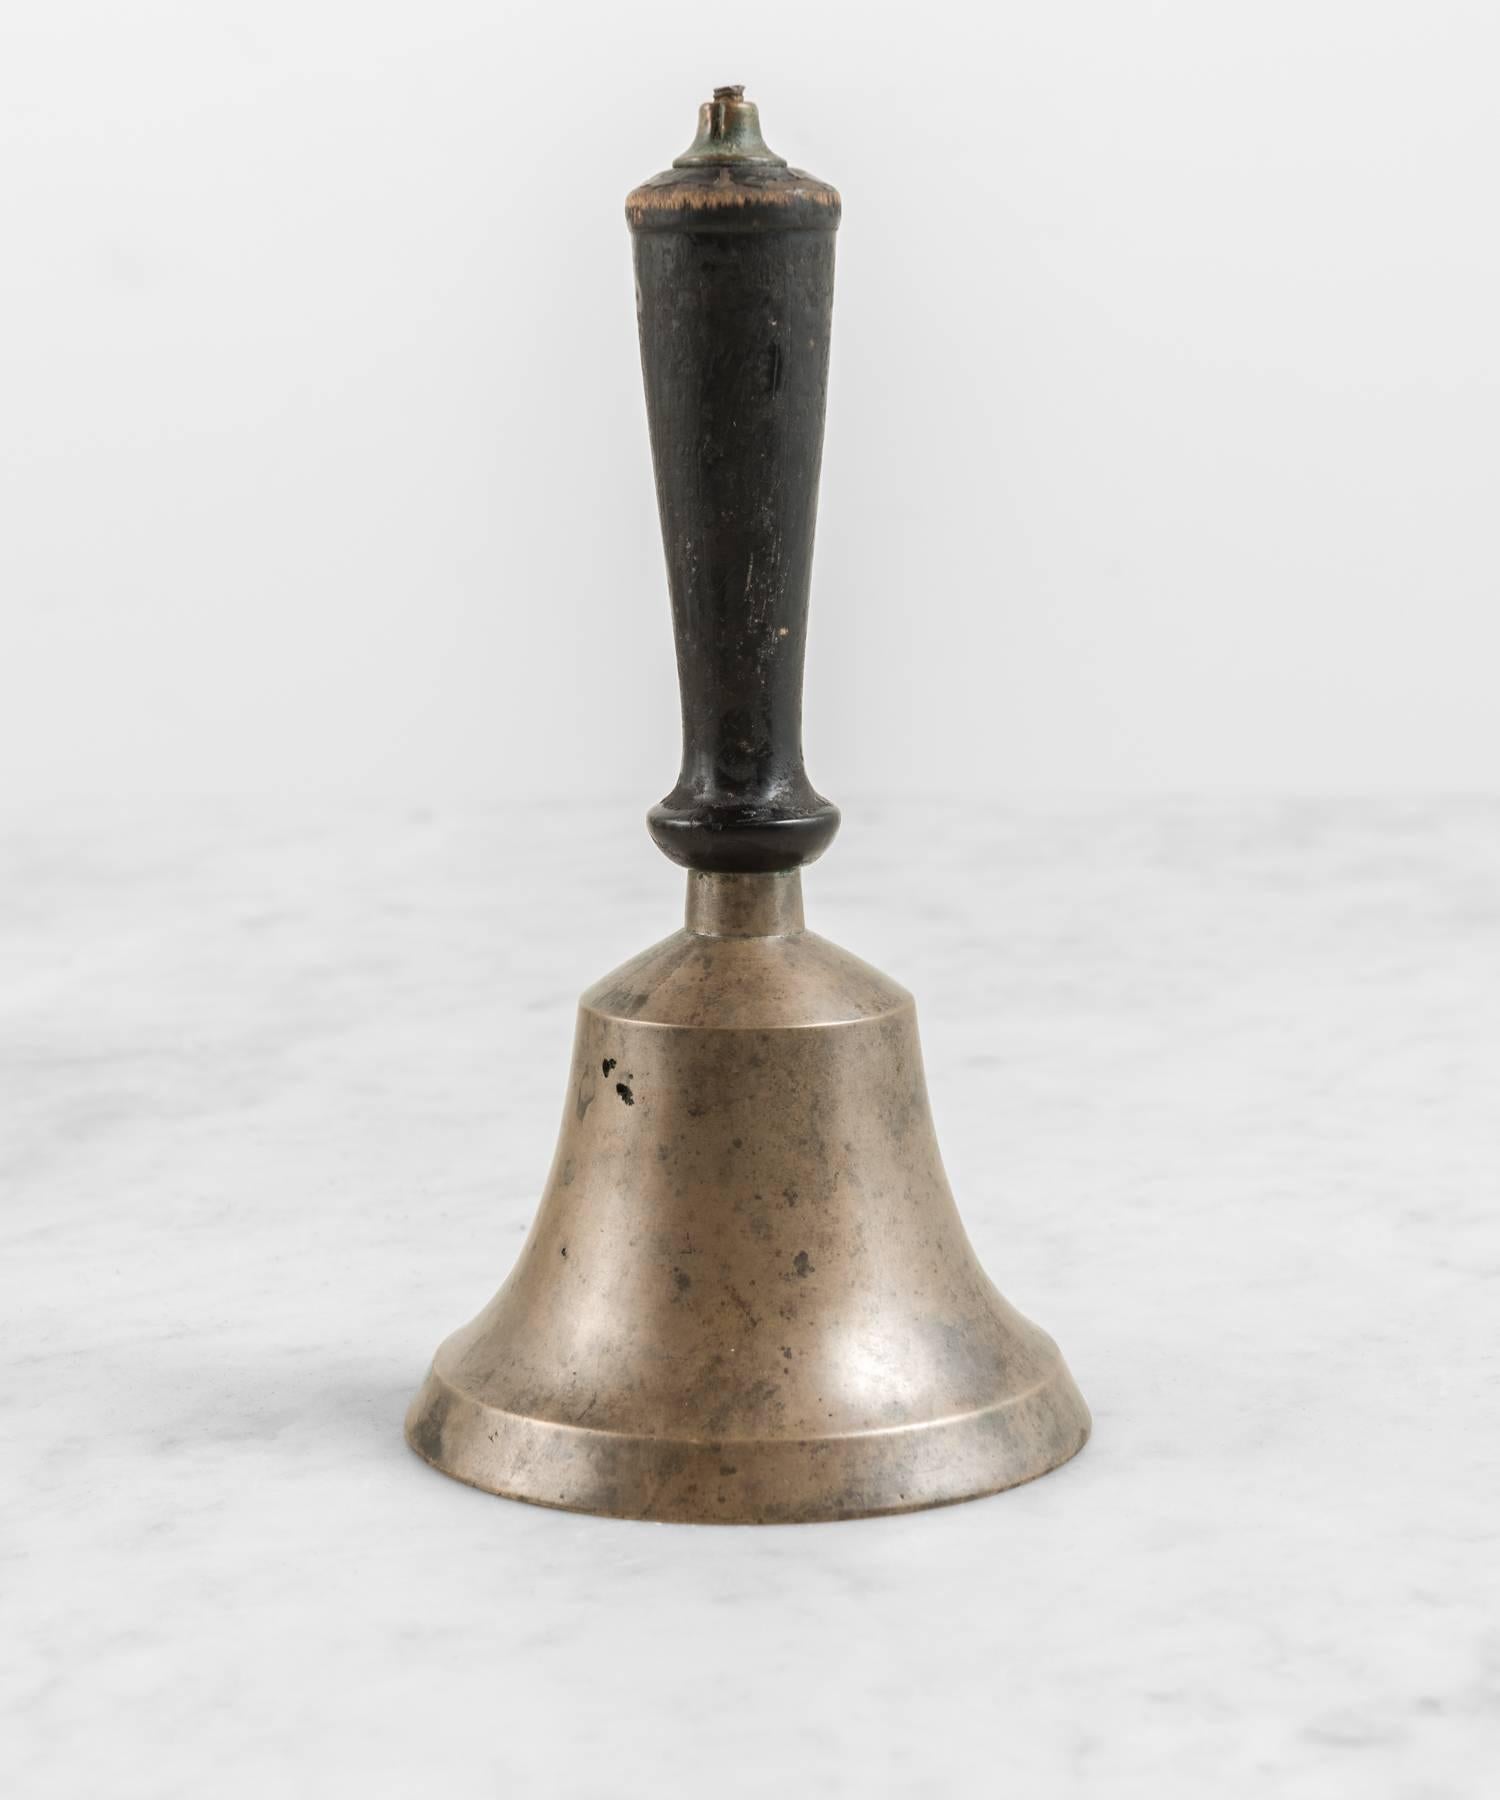 Medium Sized Bell with Wooden Handle, circa 1900-1940 4